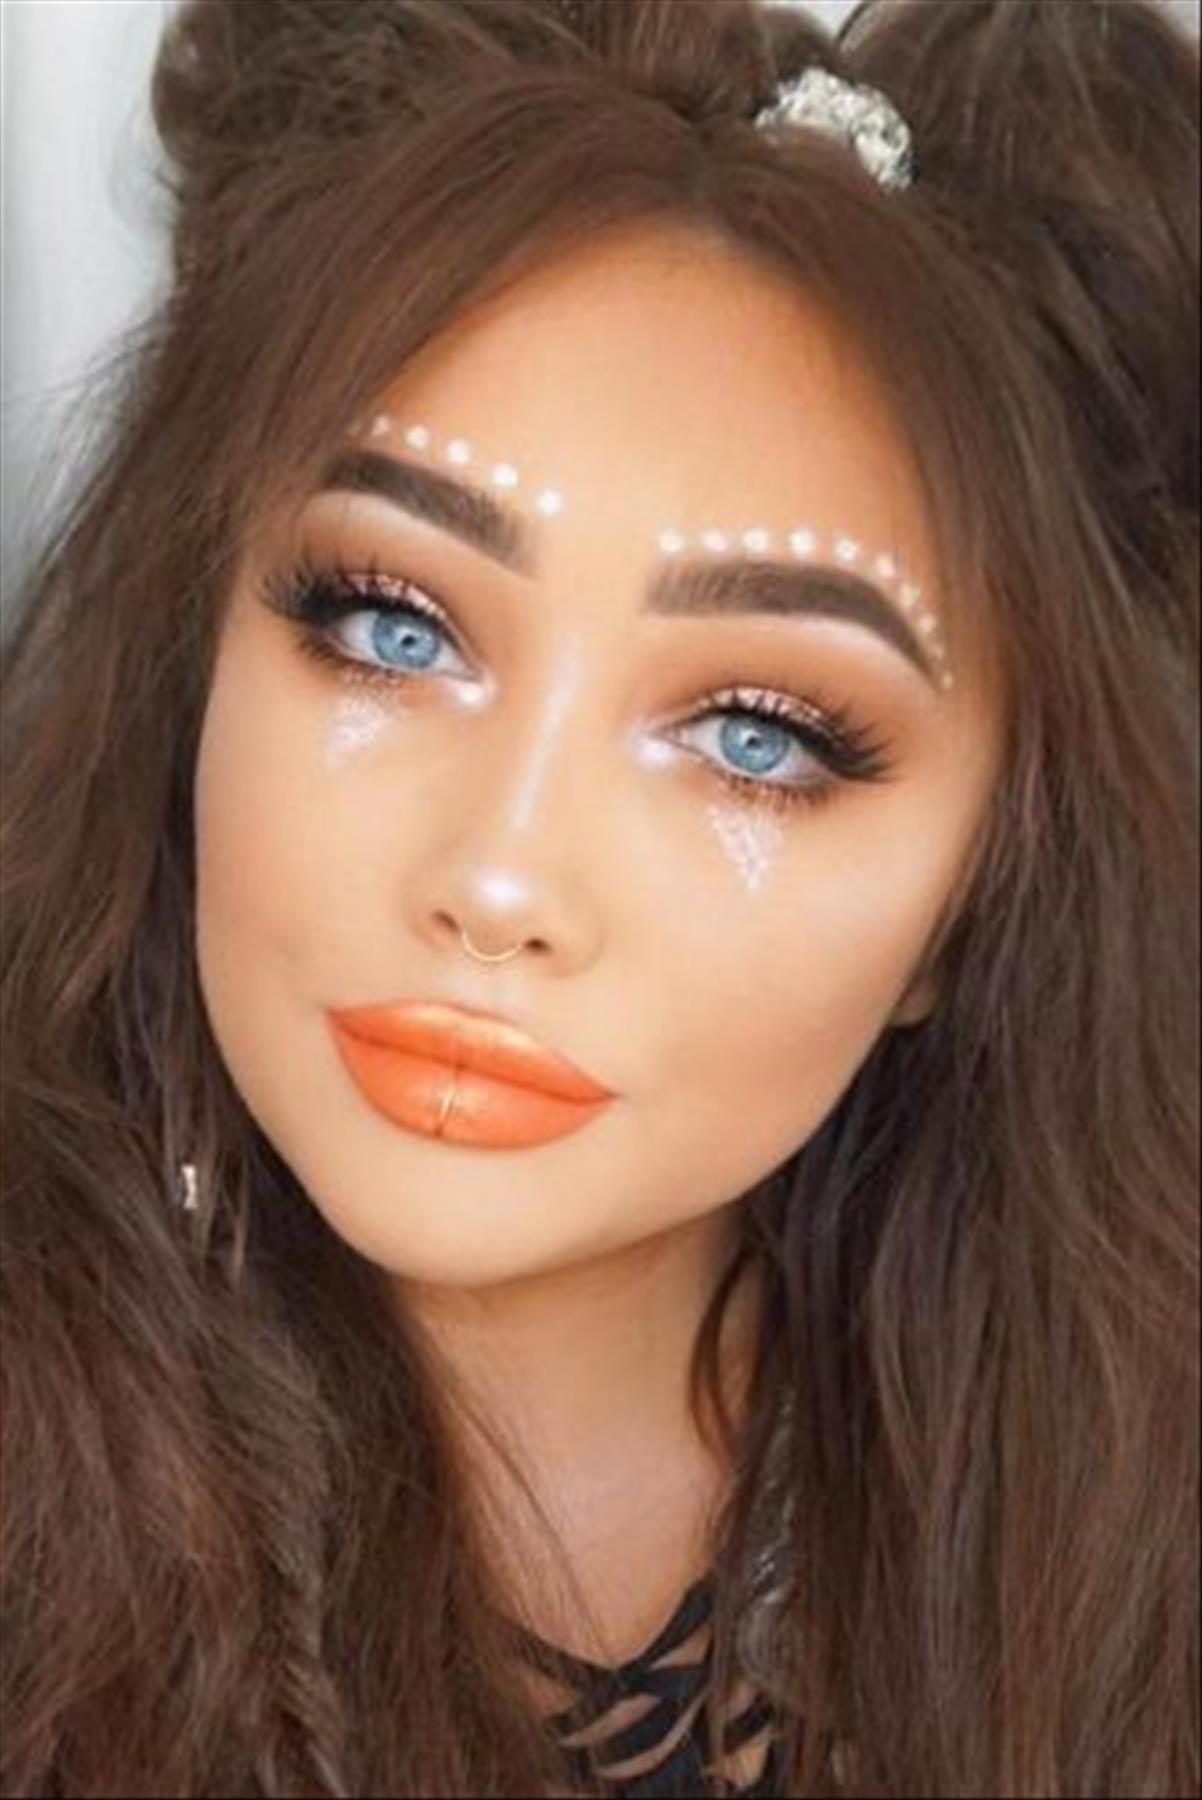 Best Festival Coachella makeup looks to be the real hit